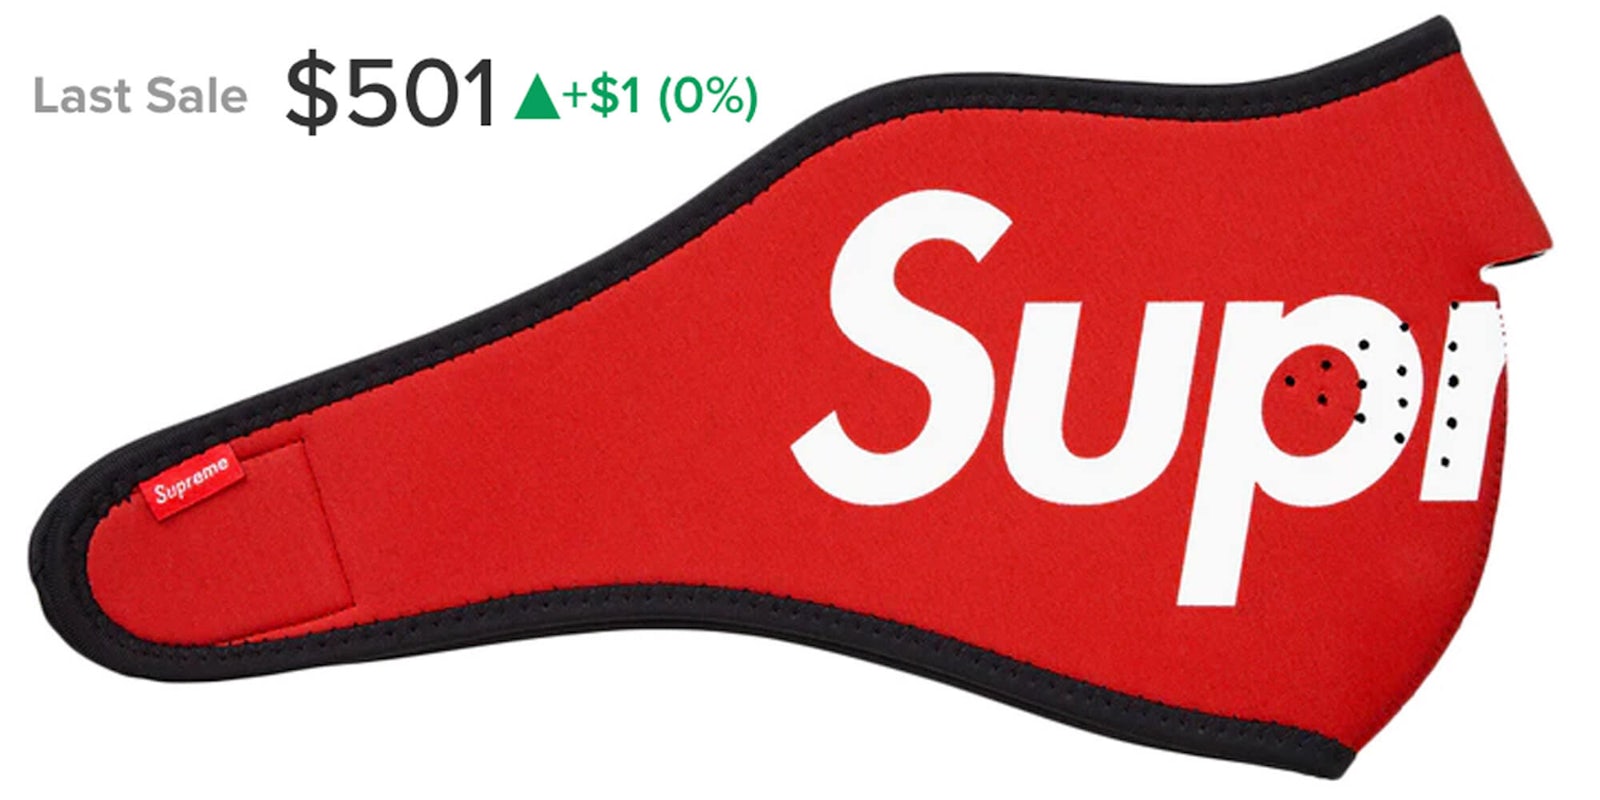 A red Supreme mask